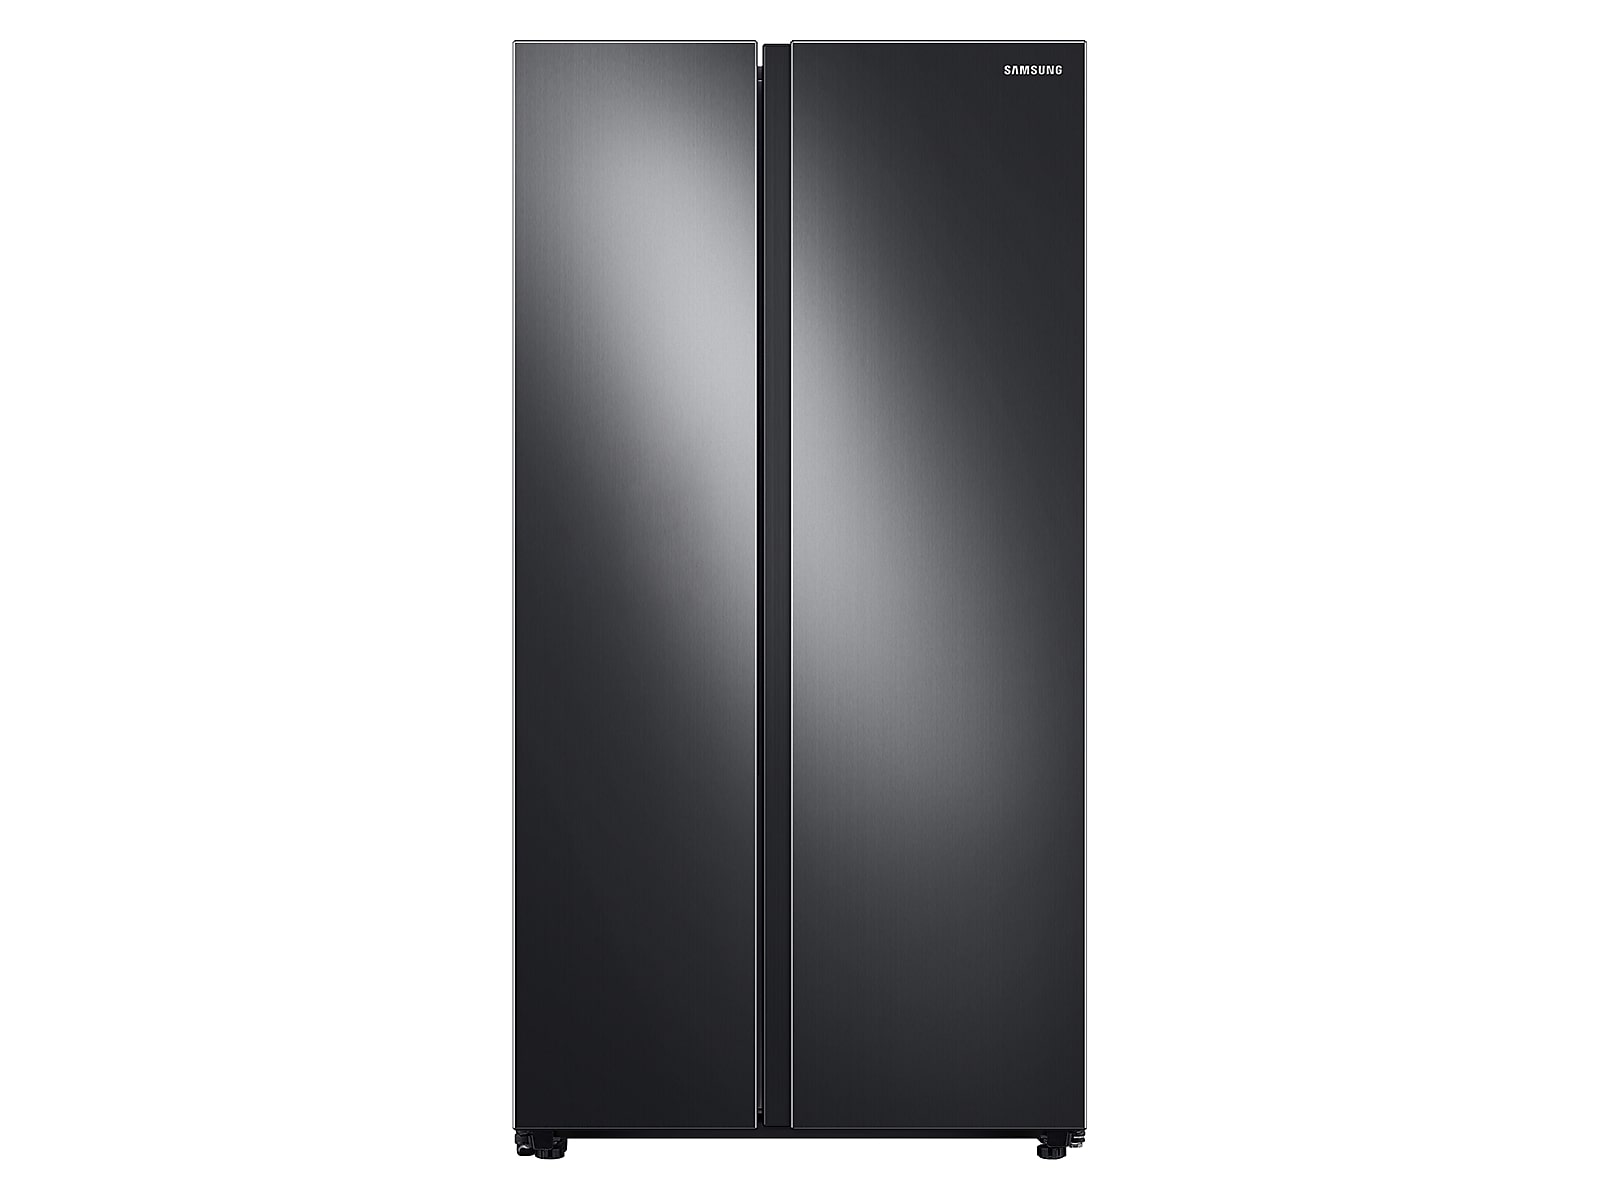 Samsung 23 cu. ft. Smart Counter Depth Side-by-Side Refrigerator in Black Stainless Steel(RS23A500ASG/AA)